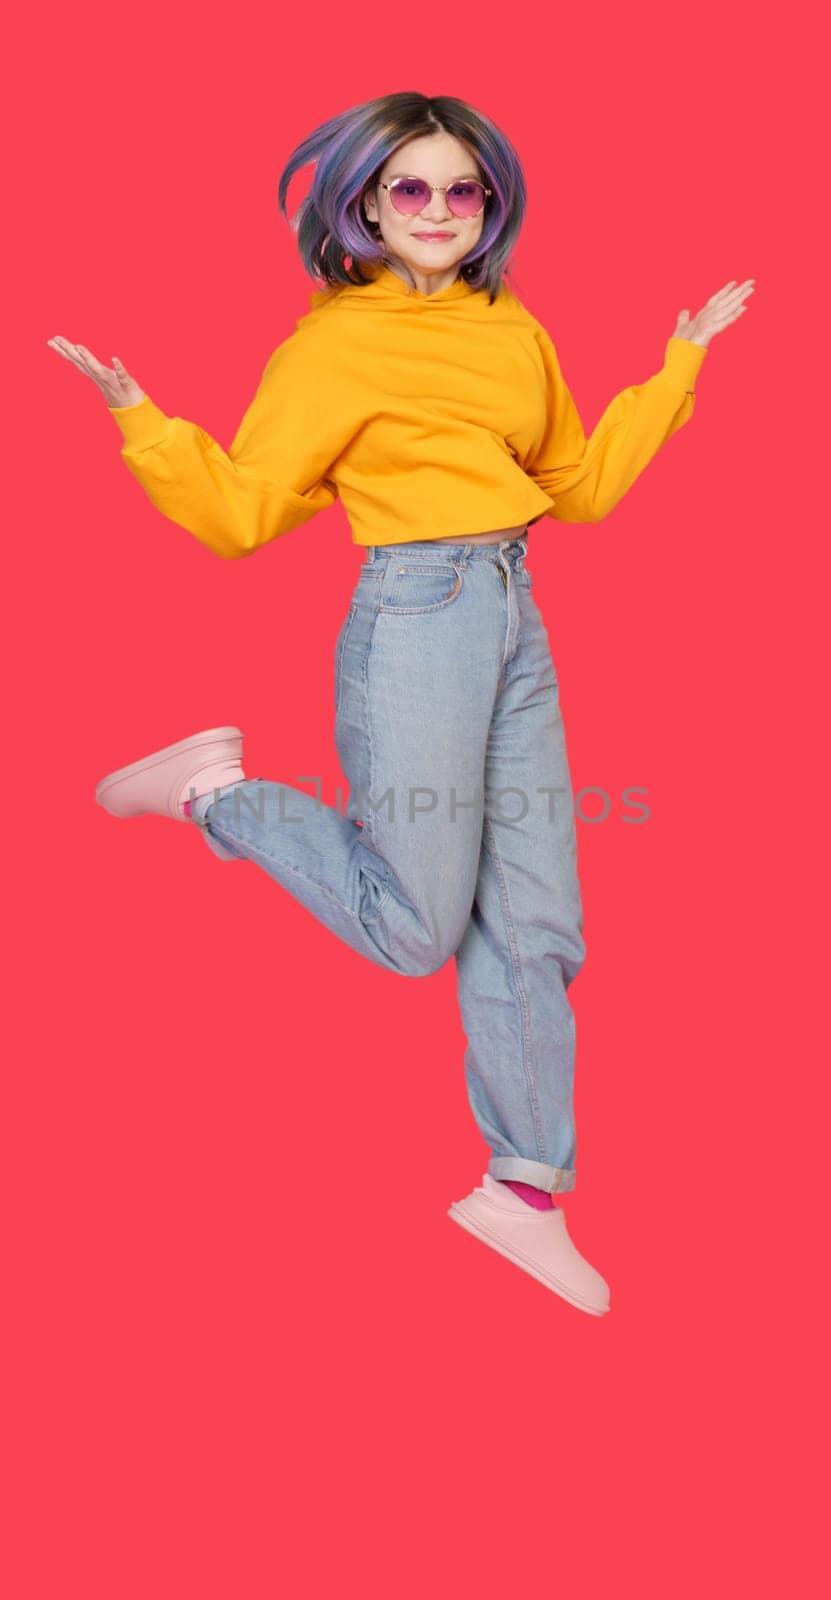 Smiling Asian girl teenager in mid-jump against vibrant red color background. Exuberance and happiness of youth, showcasing dynamic and lively nature of teenager in moment of pure joy and positivity. by LipikStockMedia